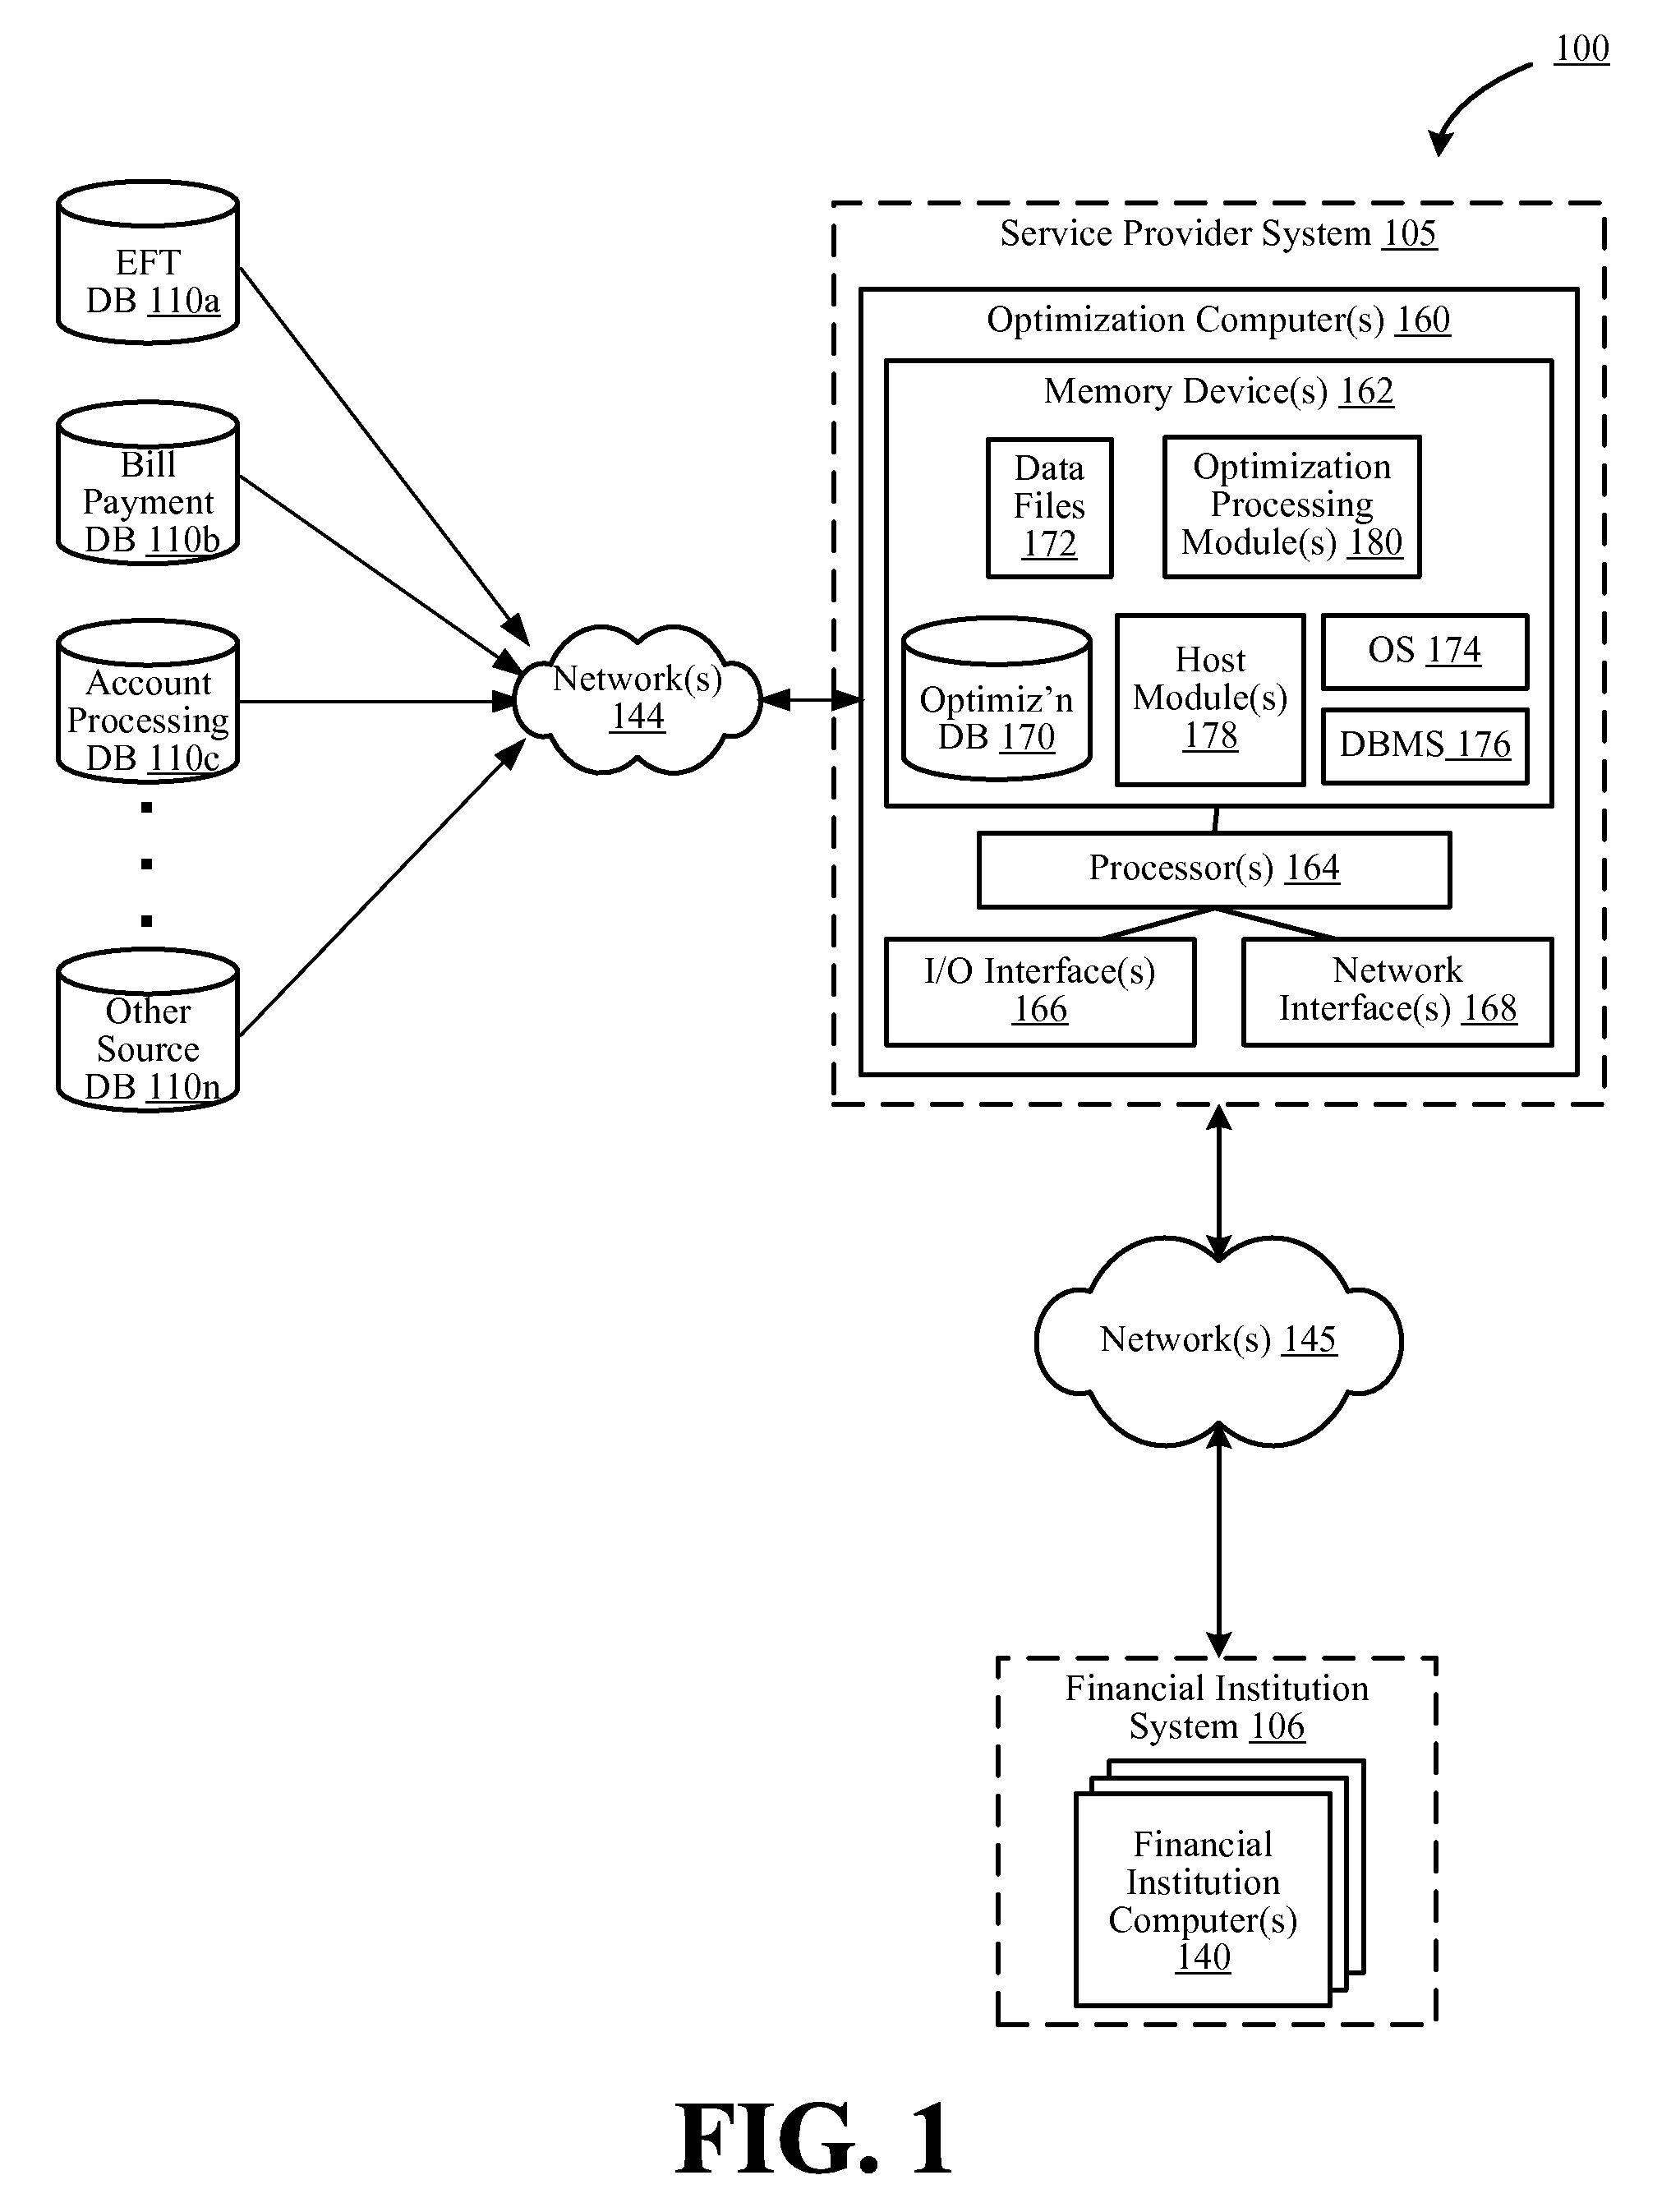 Systems and methods for customer value optimization involving relationship optimization